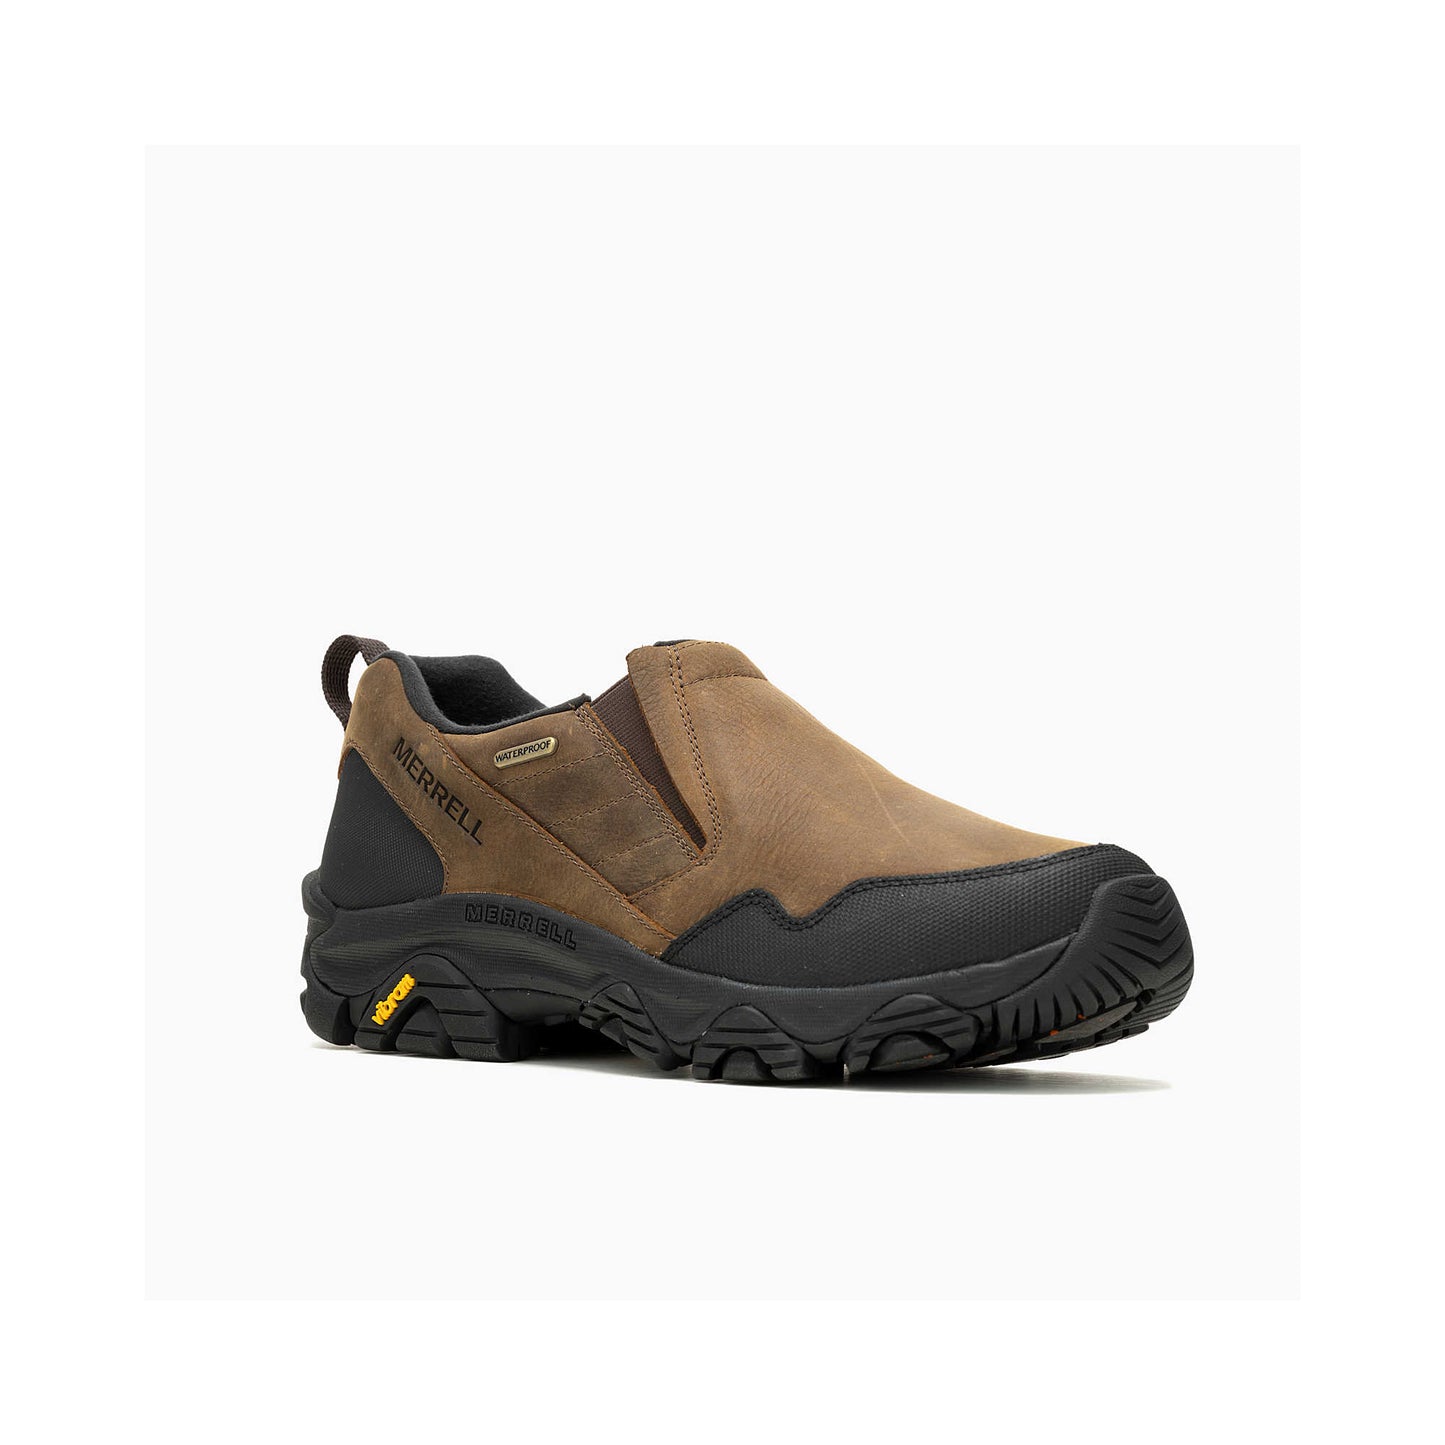 Merrell - ColdPack 3 Thermo Moc - Earth Waterproof Leather